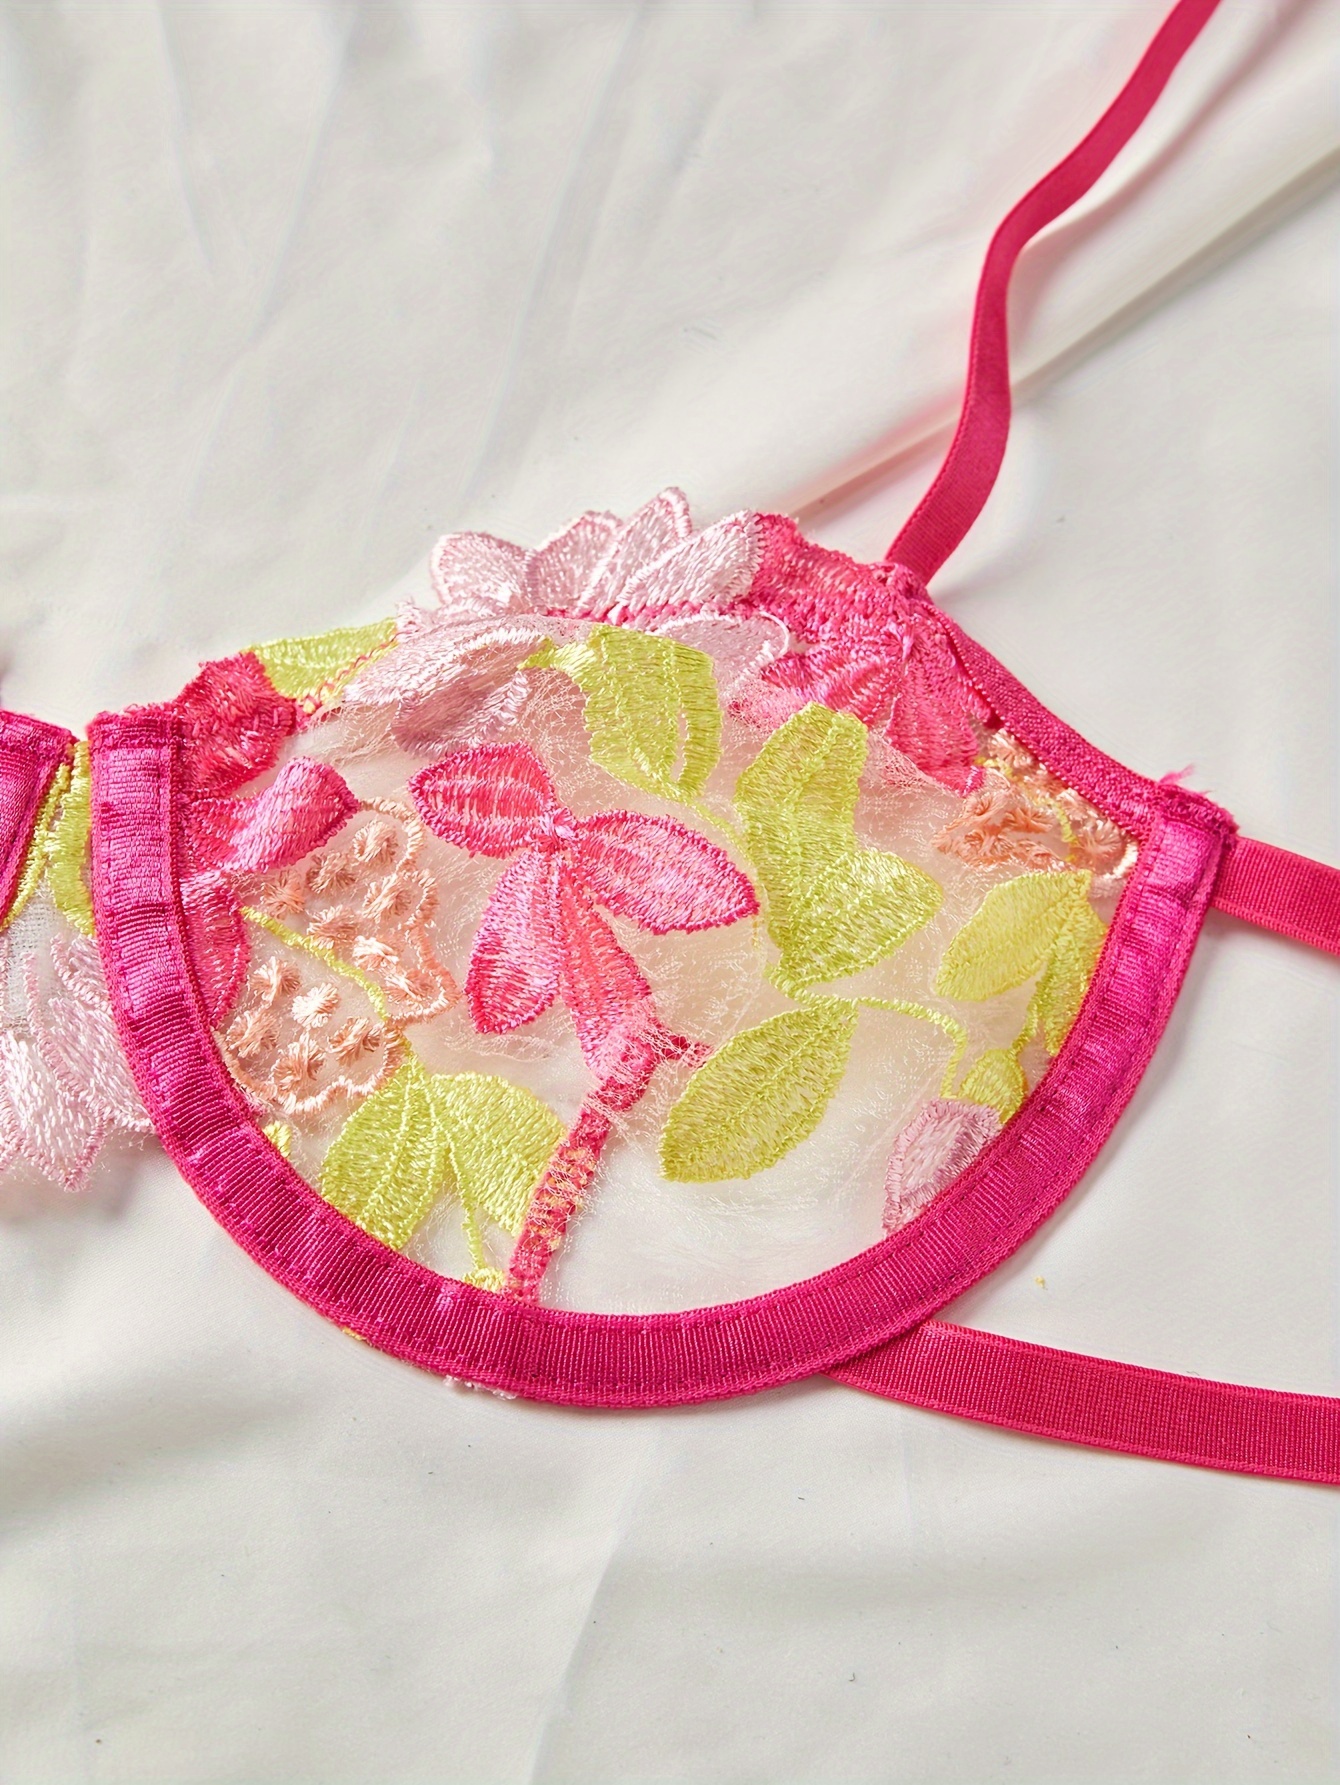 WOMENS 40D PINK Bra UNPADDED MACHINE EMBROIDERY Lingerie BY RUTATA NEW TAGS